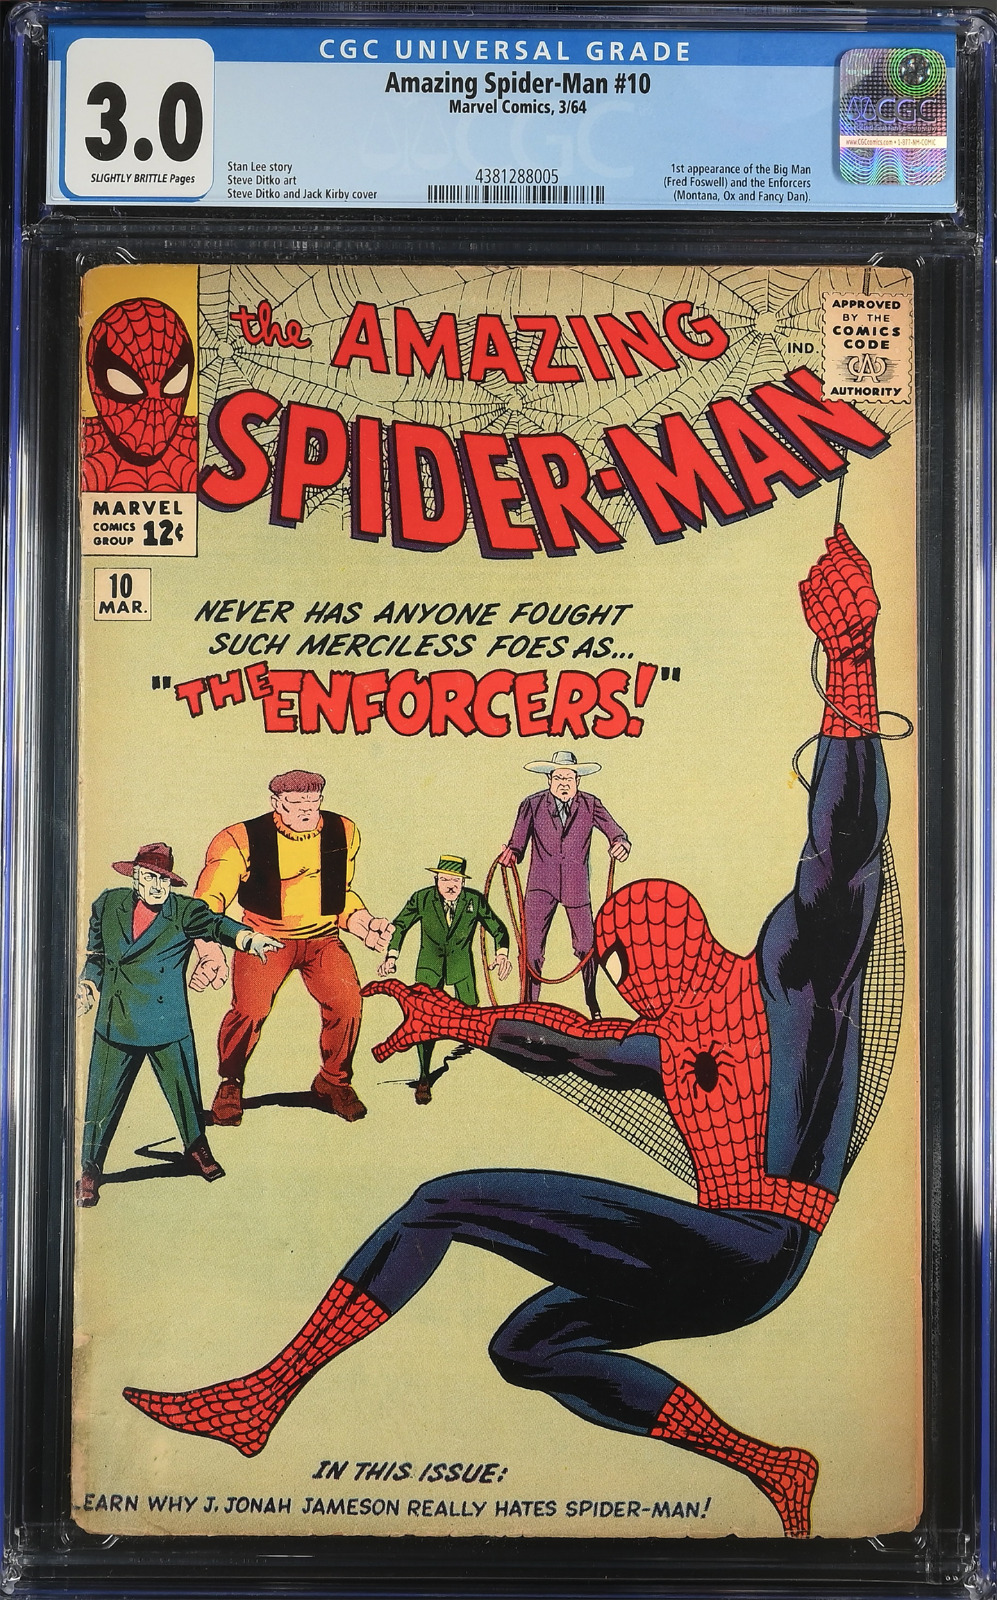 THE AMAZING SPIDER-MAN #10 MARCH 1964-CGC 3.0 *FIRST BIG MAN/ENFORCERS*